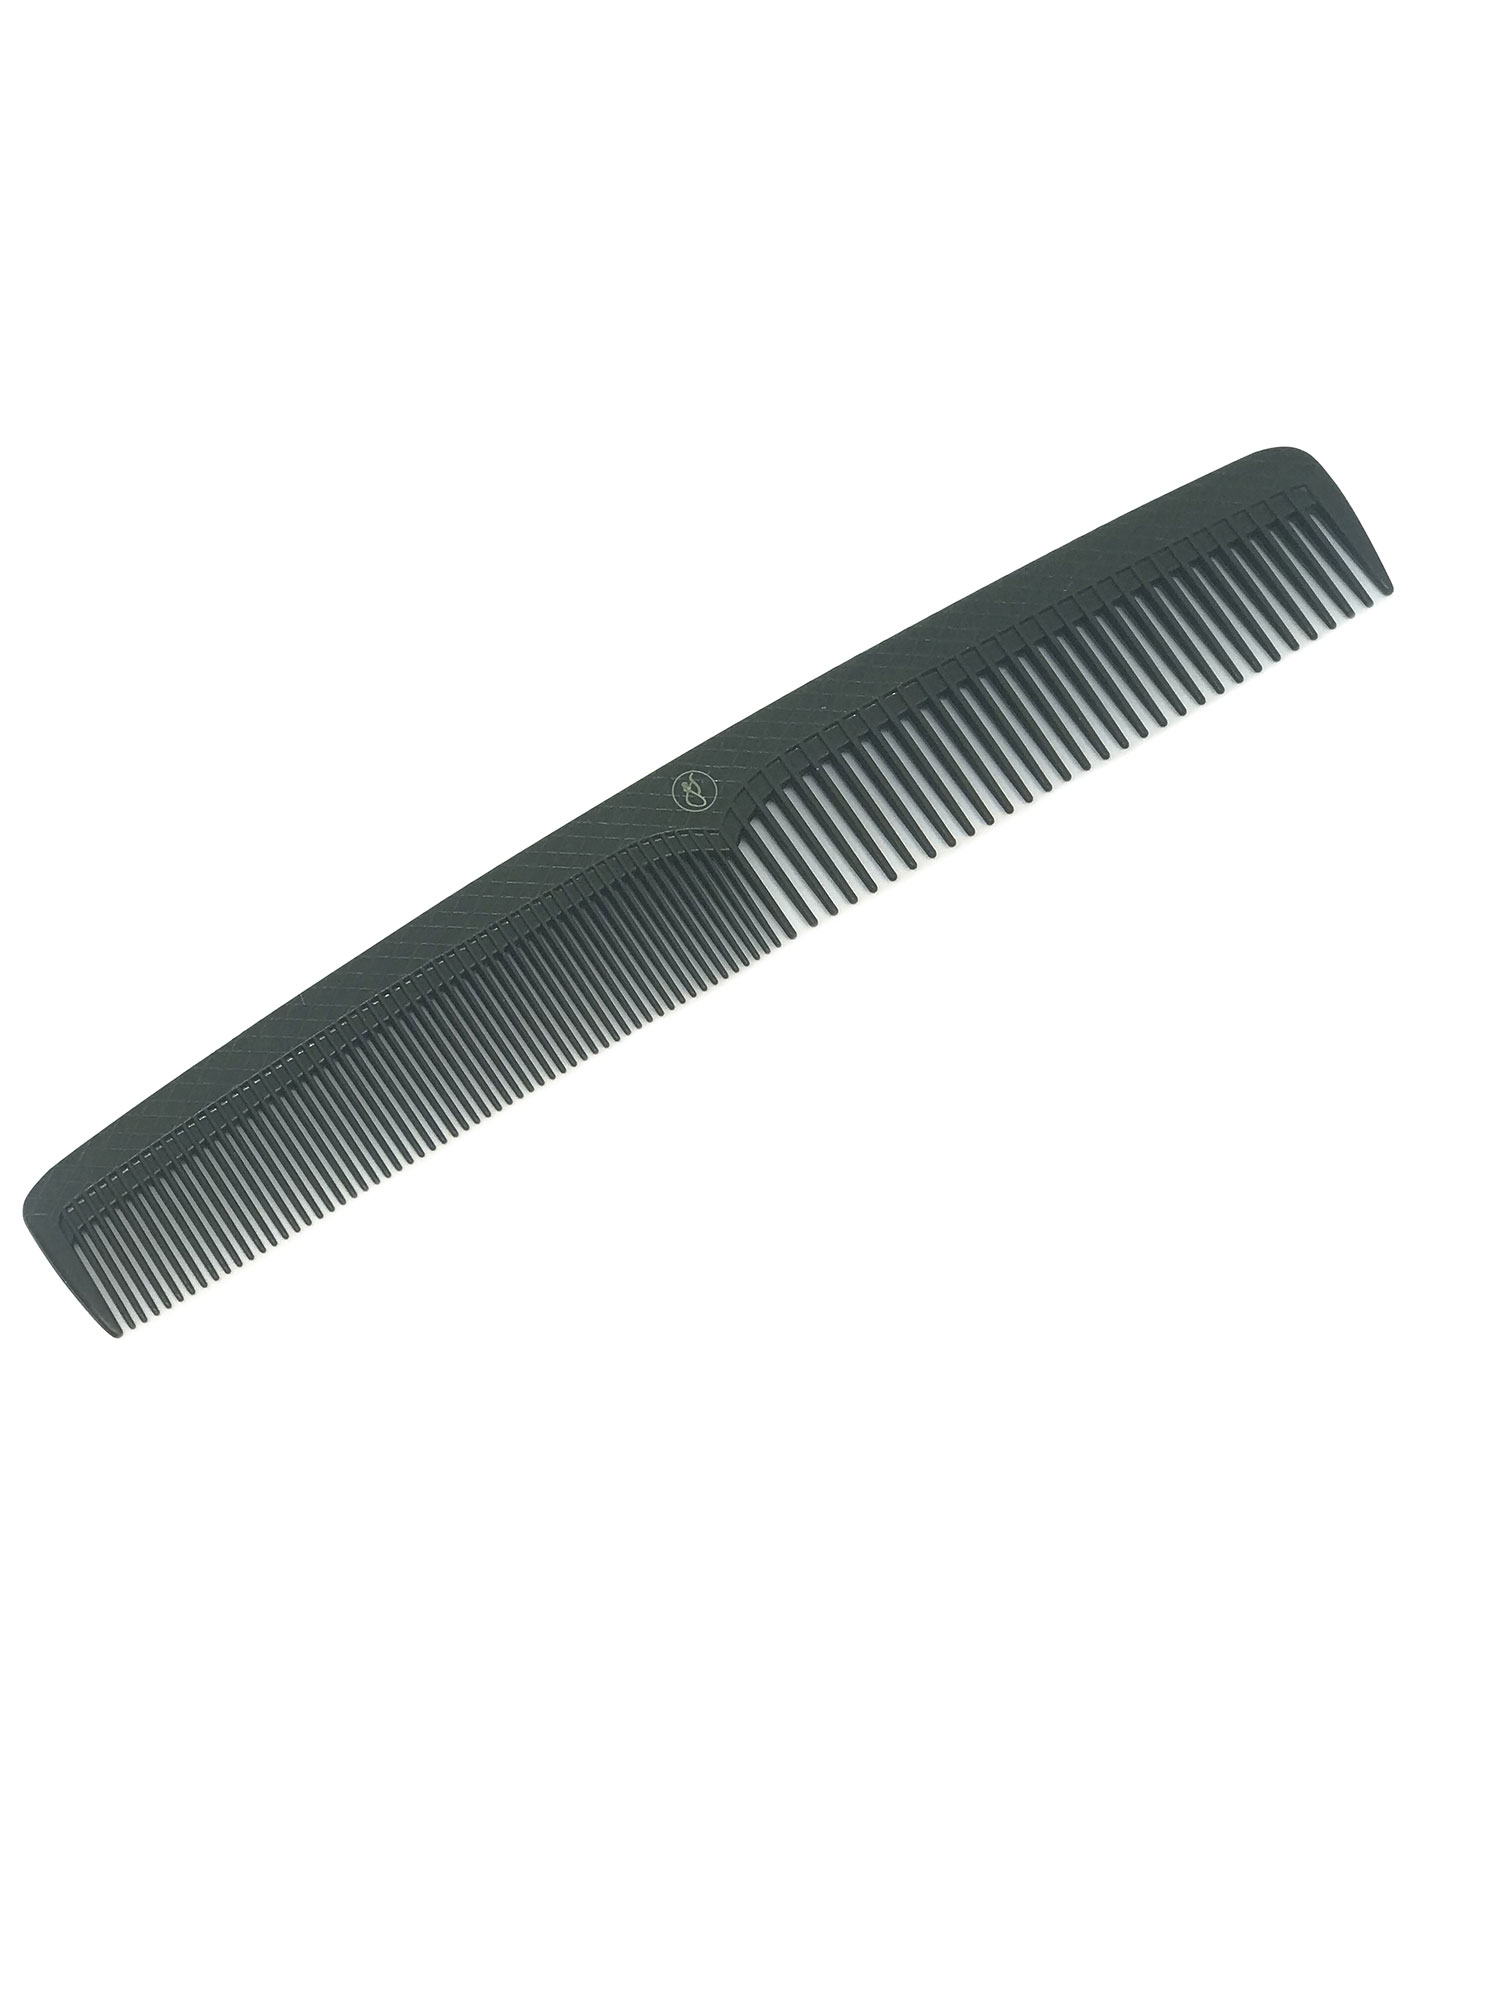 THE GS GREEN COMB